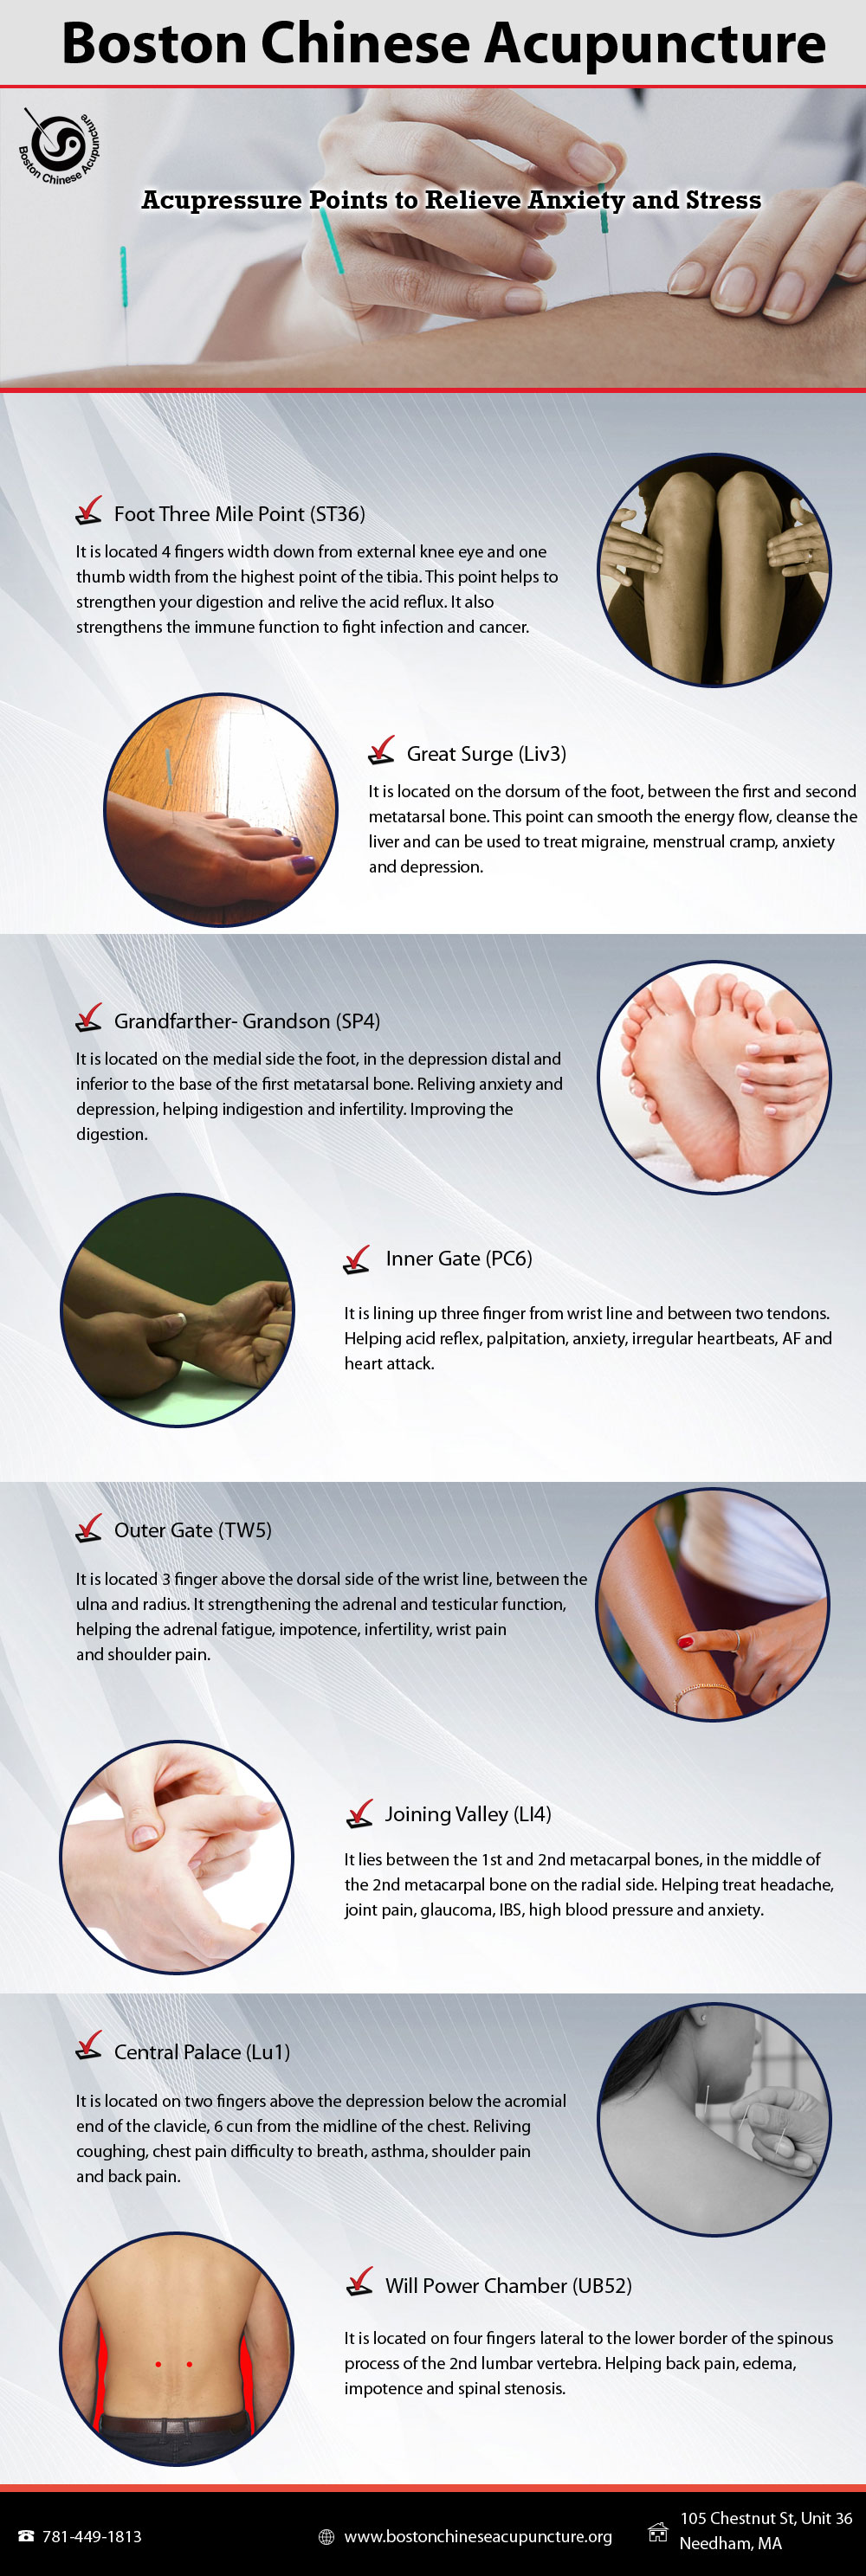 Acupressure Points to Relieve Anxiety and Stress